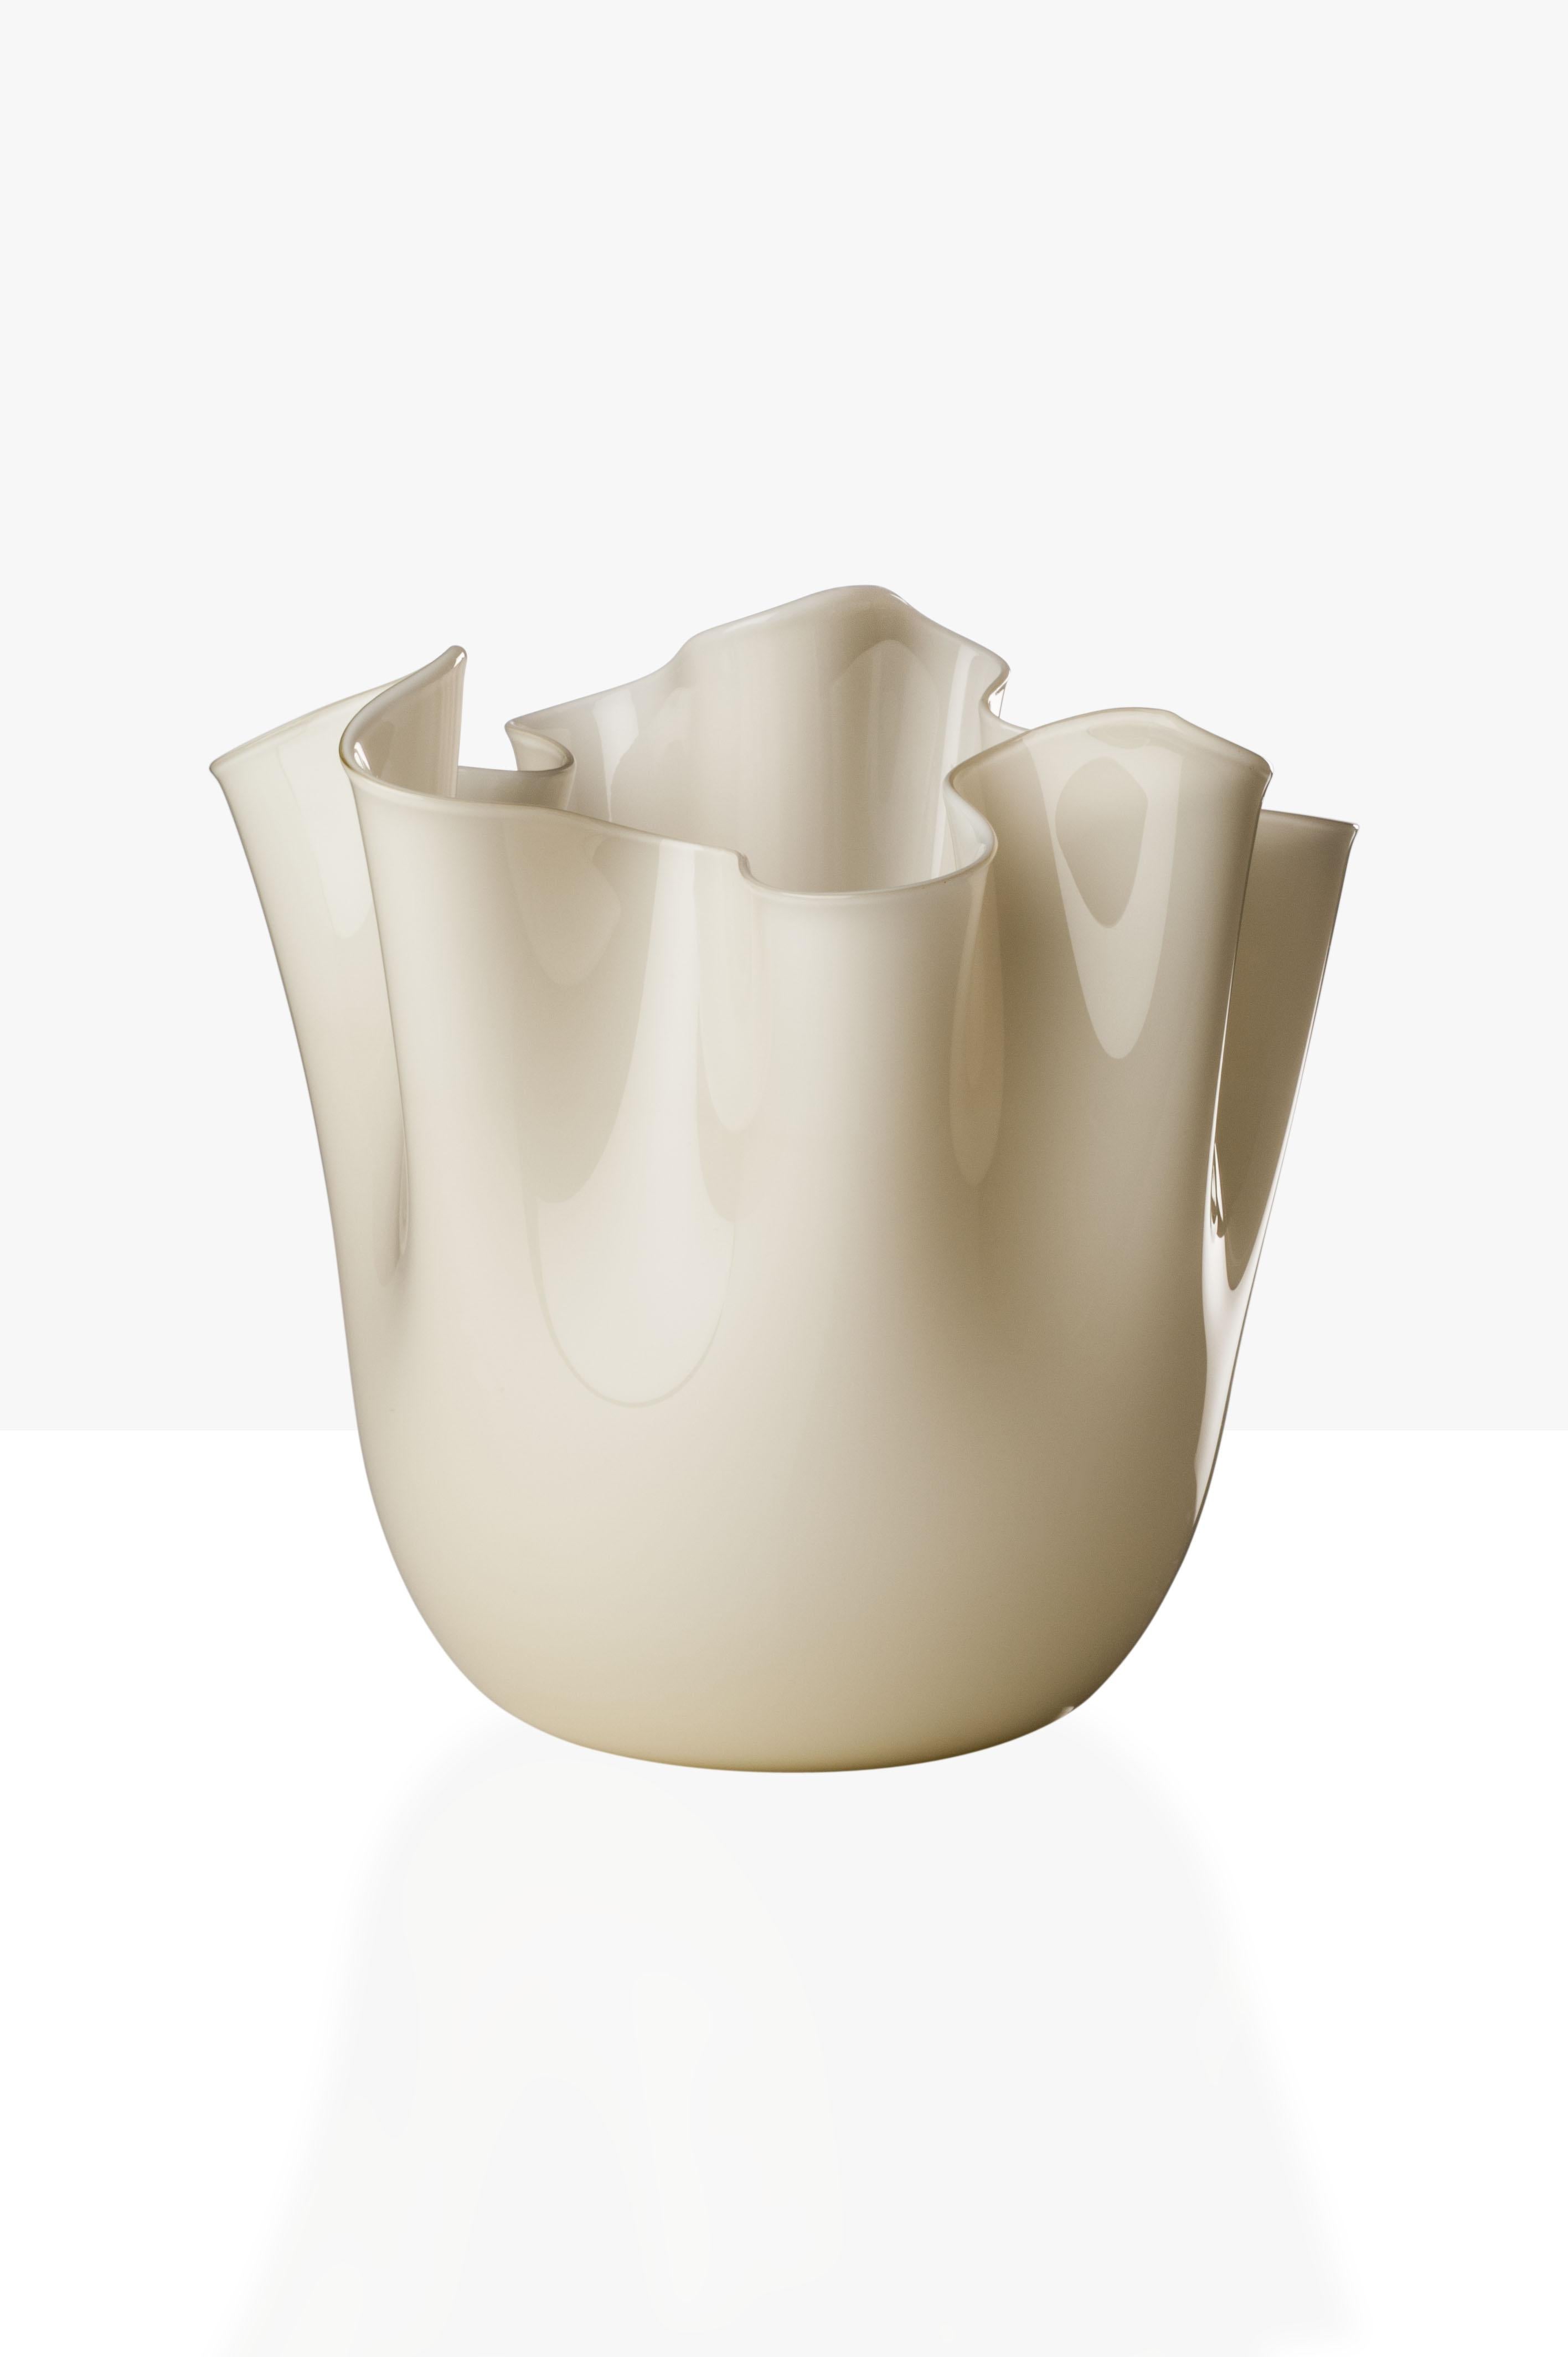 Fazzoletto glass vase, designed by Fulvio Bianconi and Paolo Venini and manufactured by Venini, is available in three different sizes. Original designed in 1948. Indoor use only.

Dimensions: Ø 23 cm, H 31 cm.